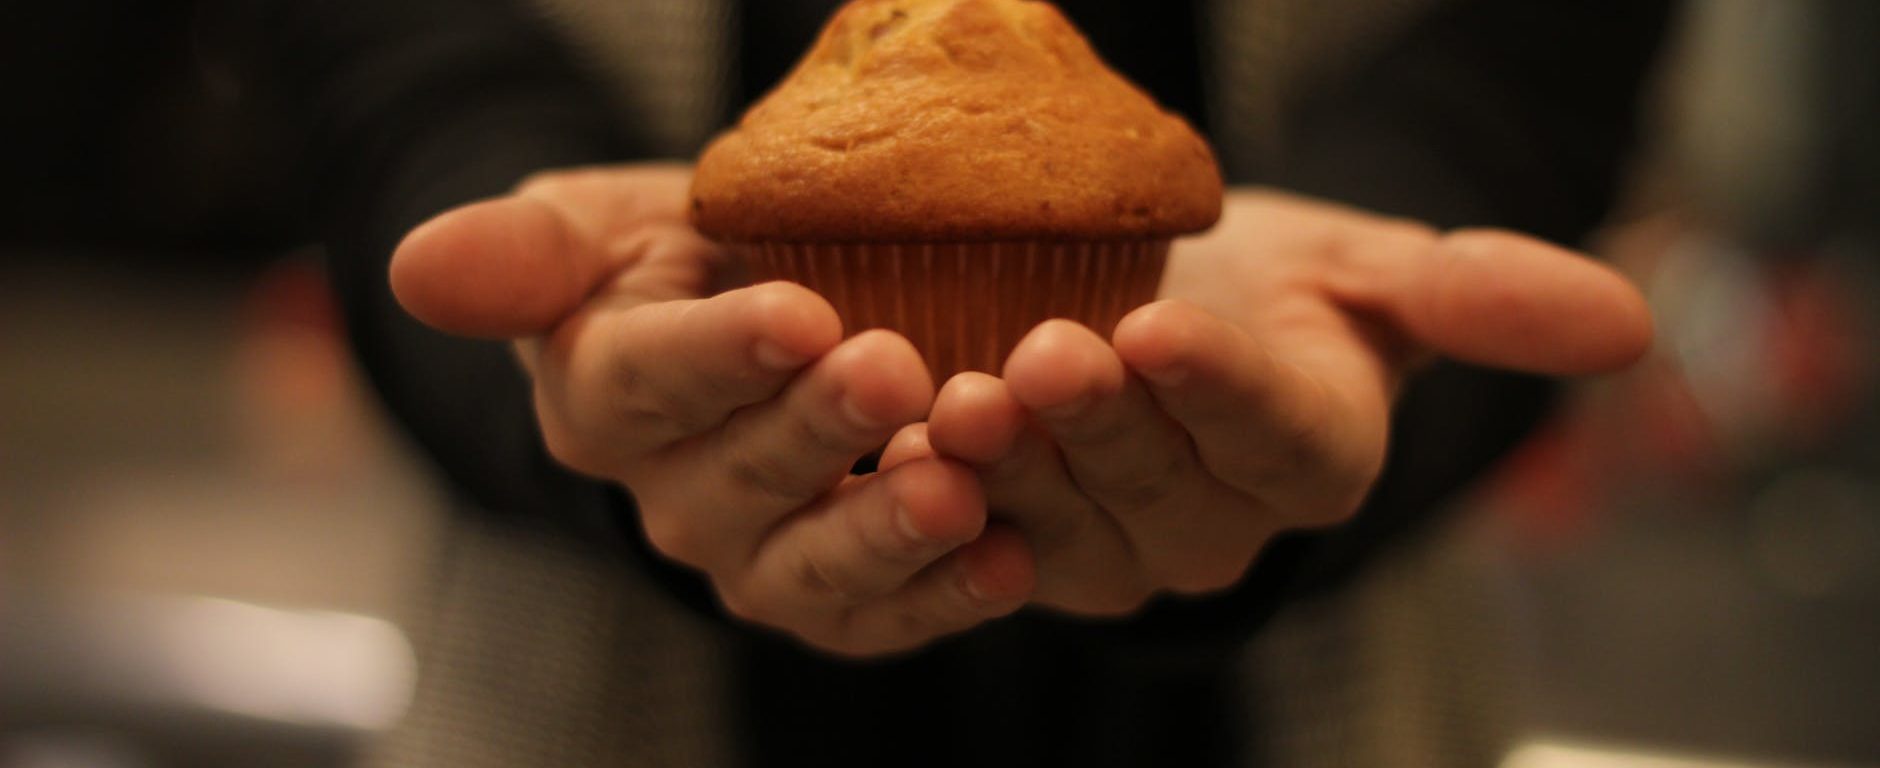 person s hand with cupcake